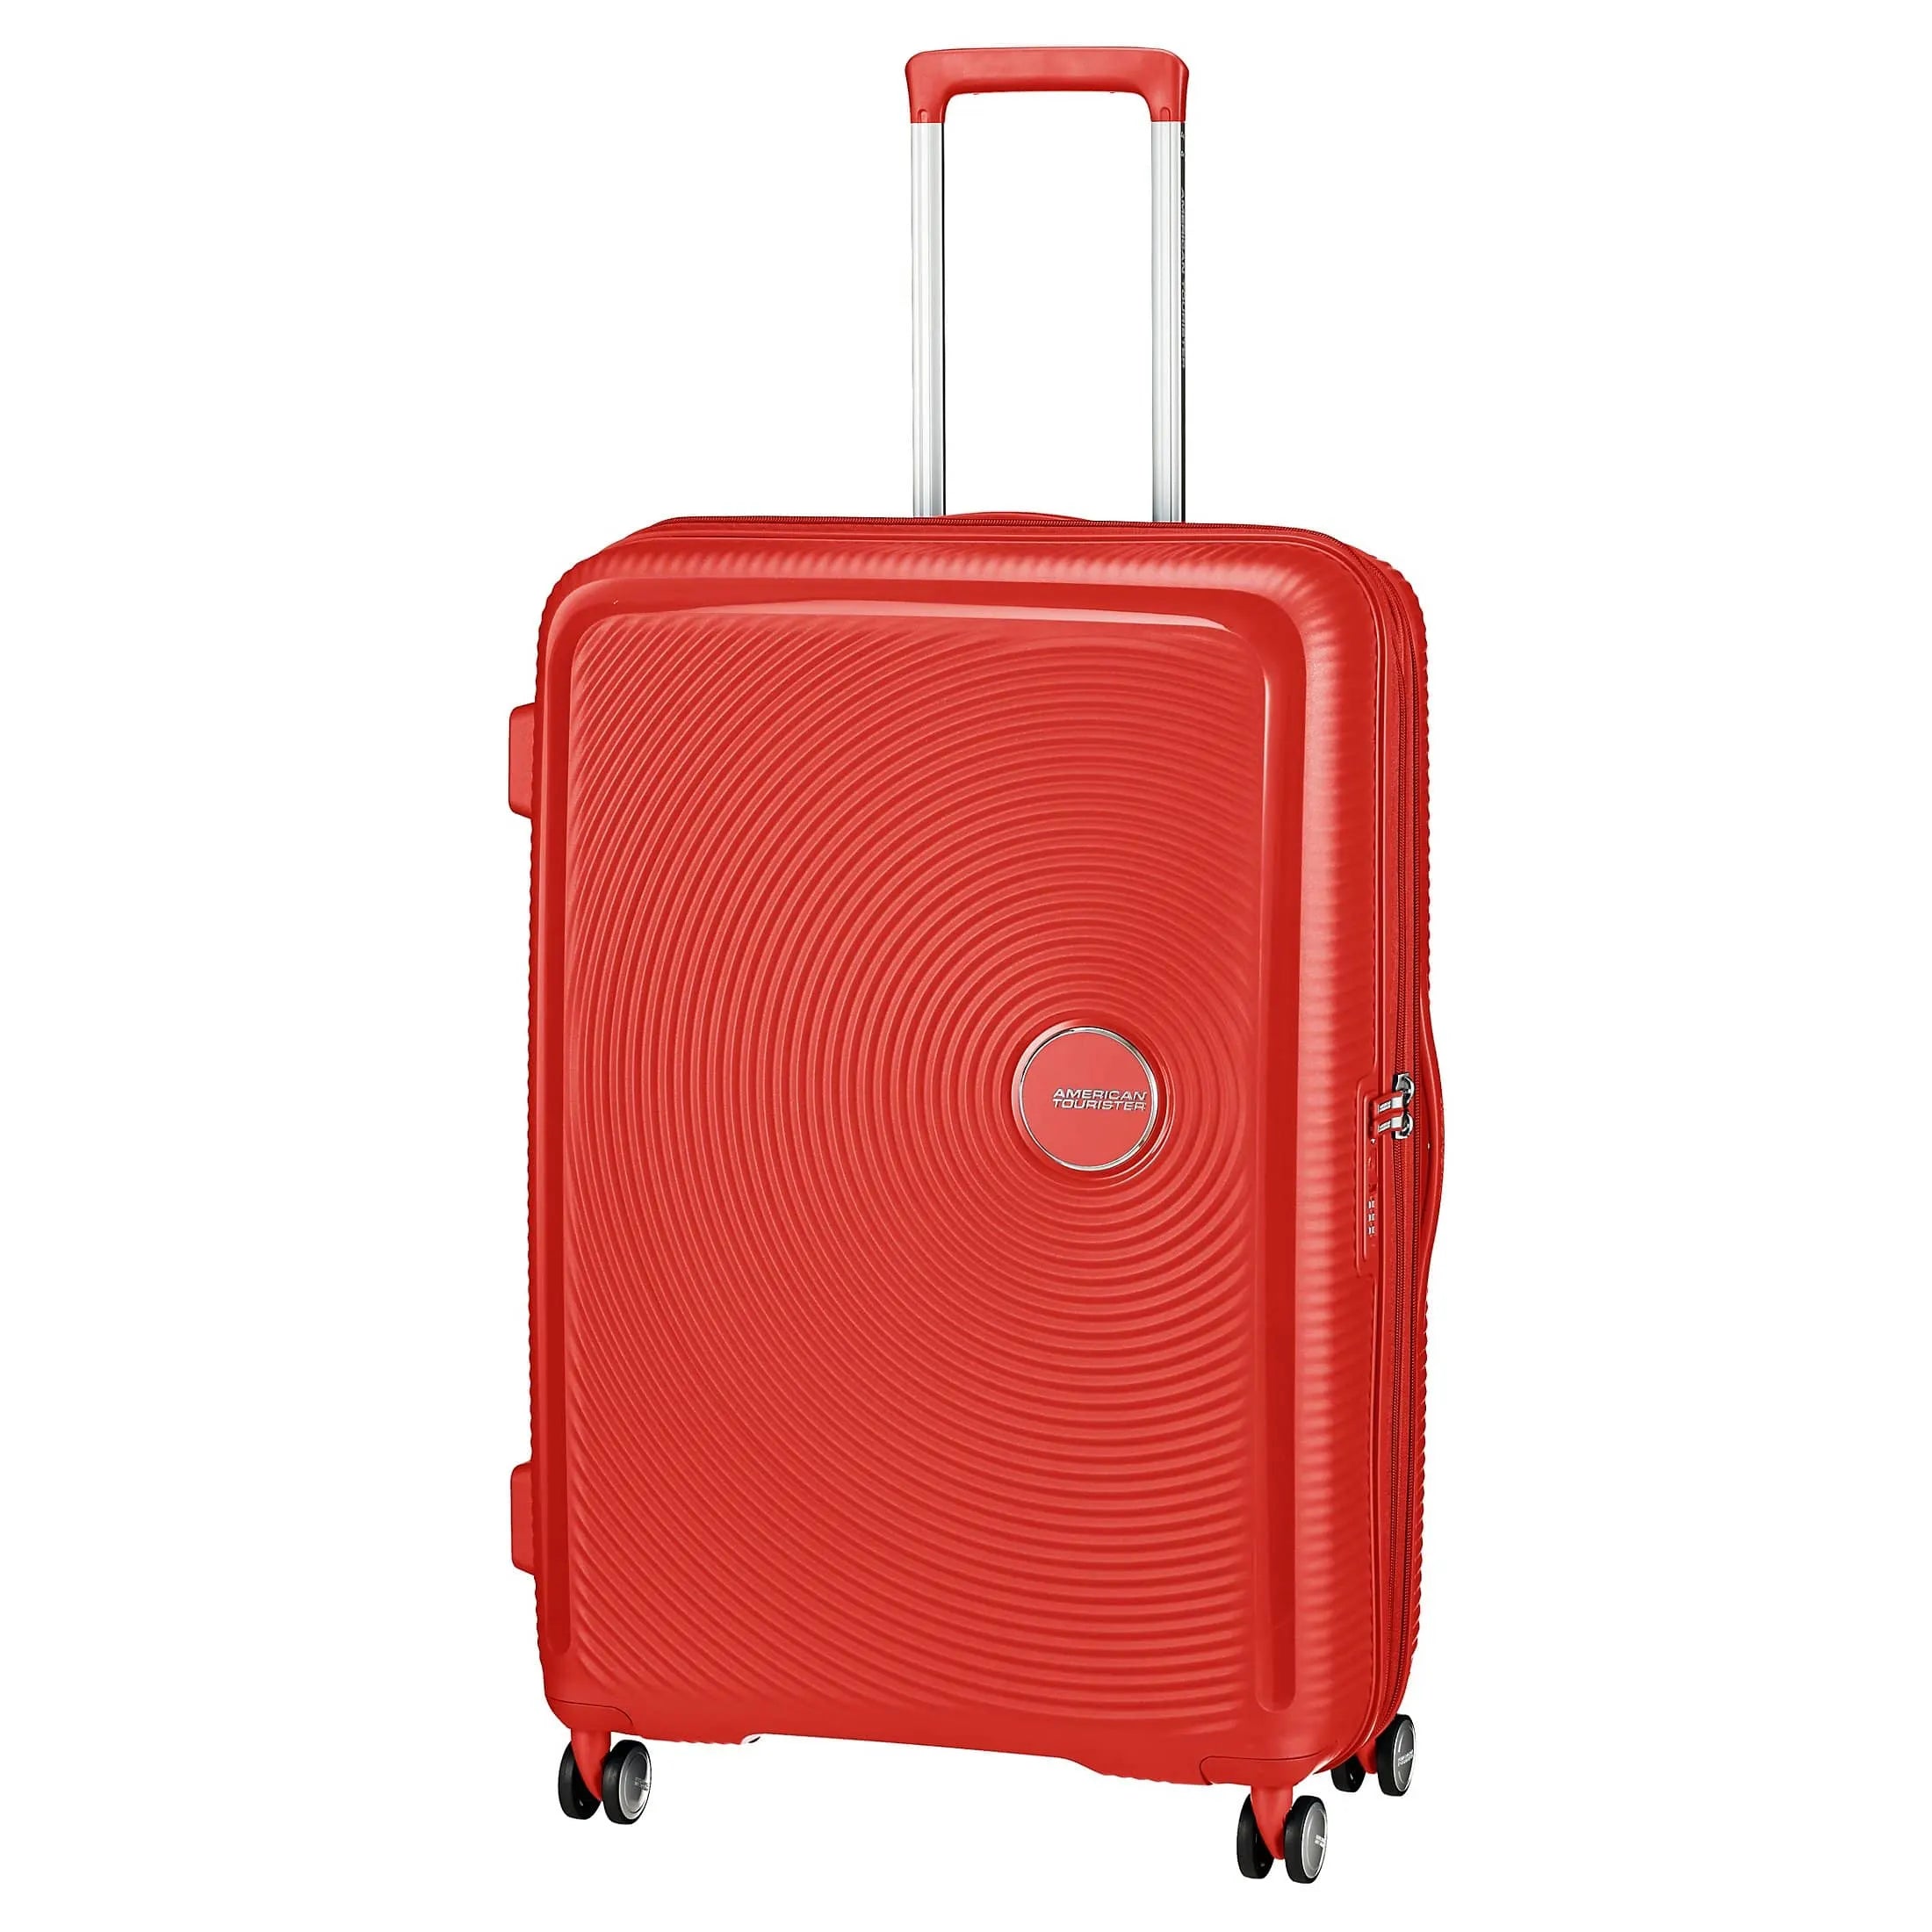 American Tourister Soundbox trolley 4 roues 77 cm - rouge corail